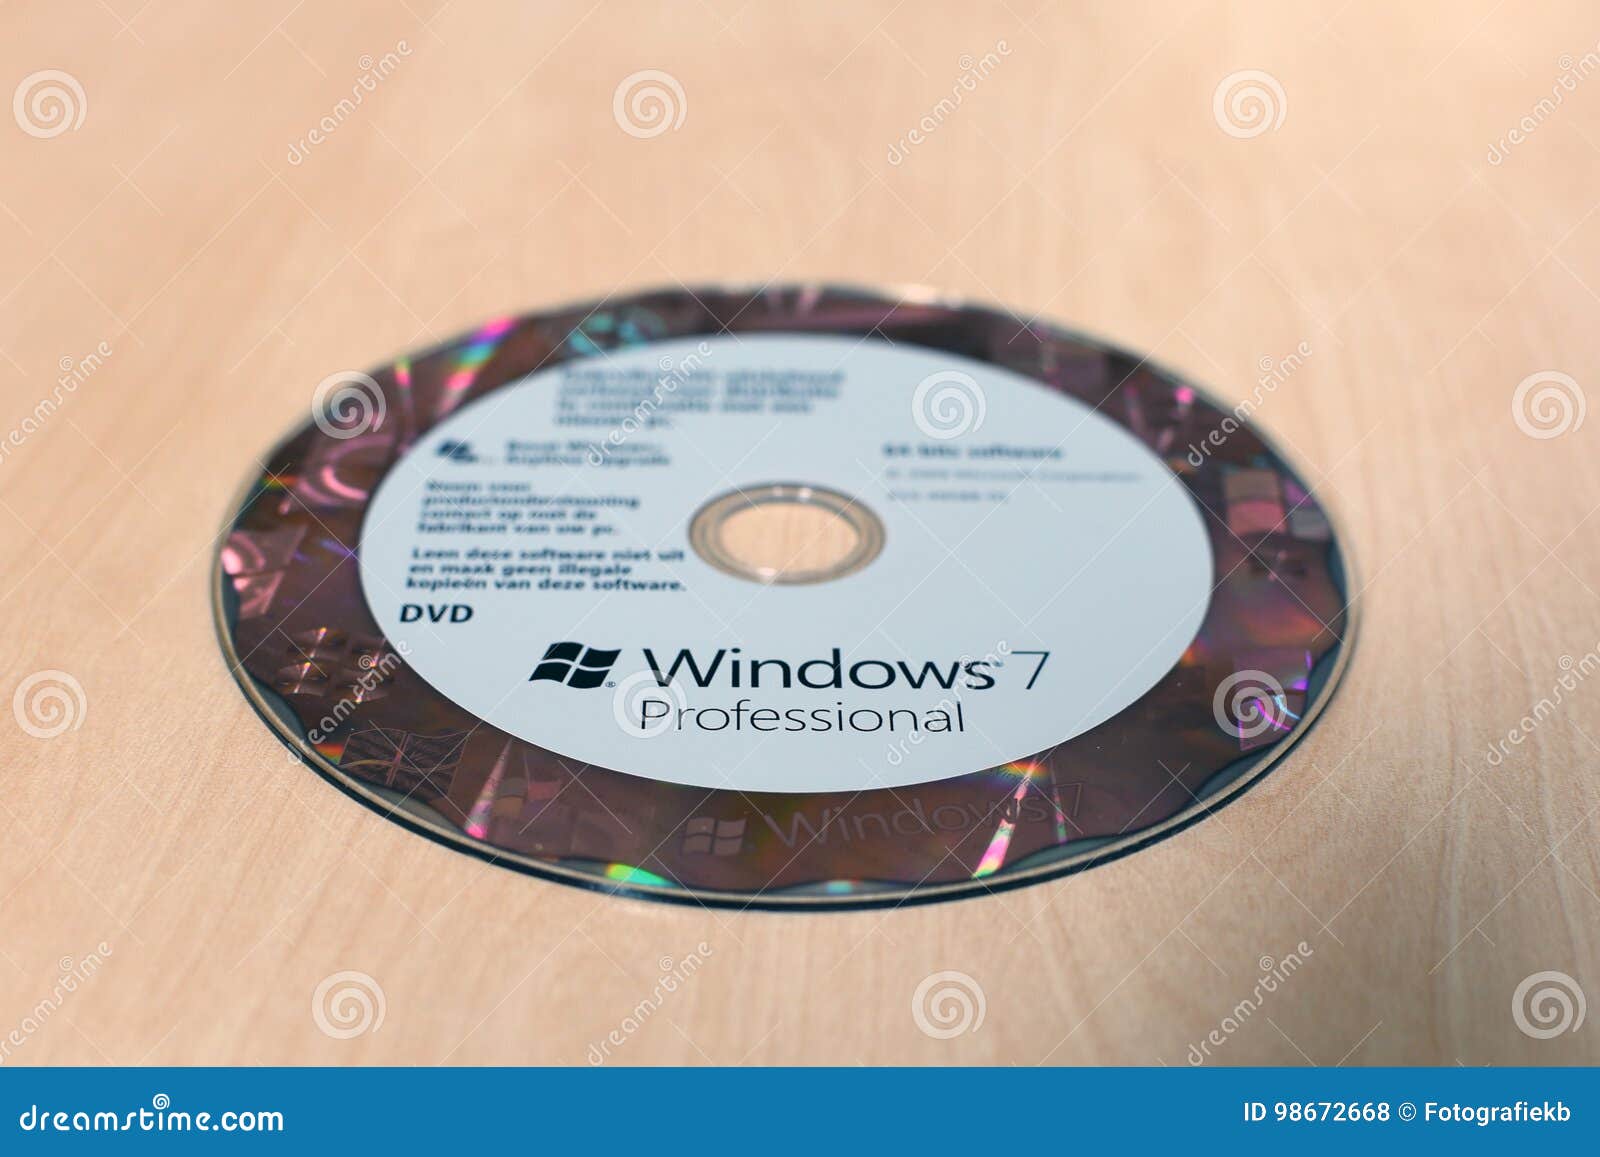 Windows 7 Professional DVD on the Table Editorial Stock Photo - Image of  media, windows: 98672668